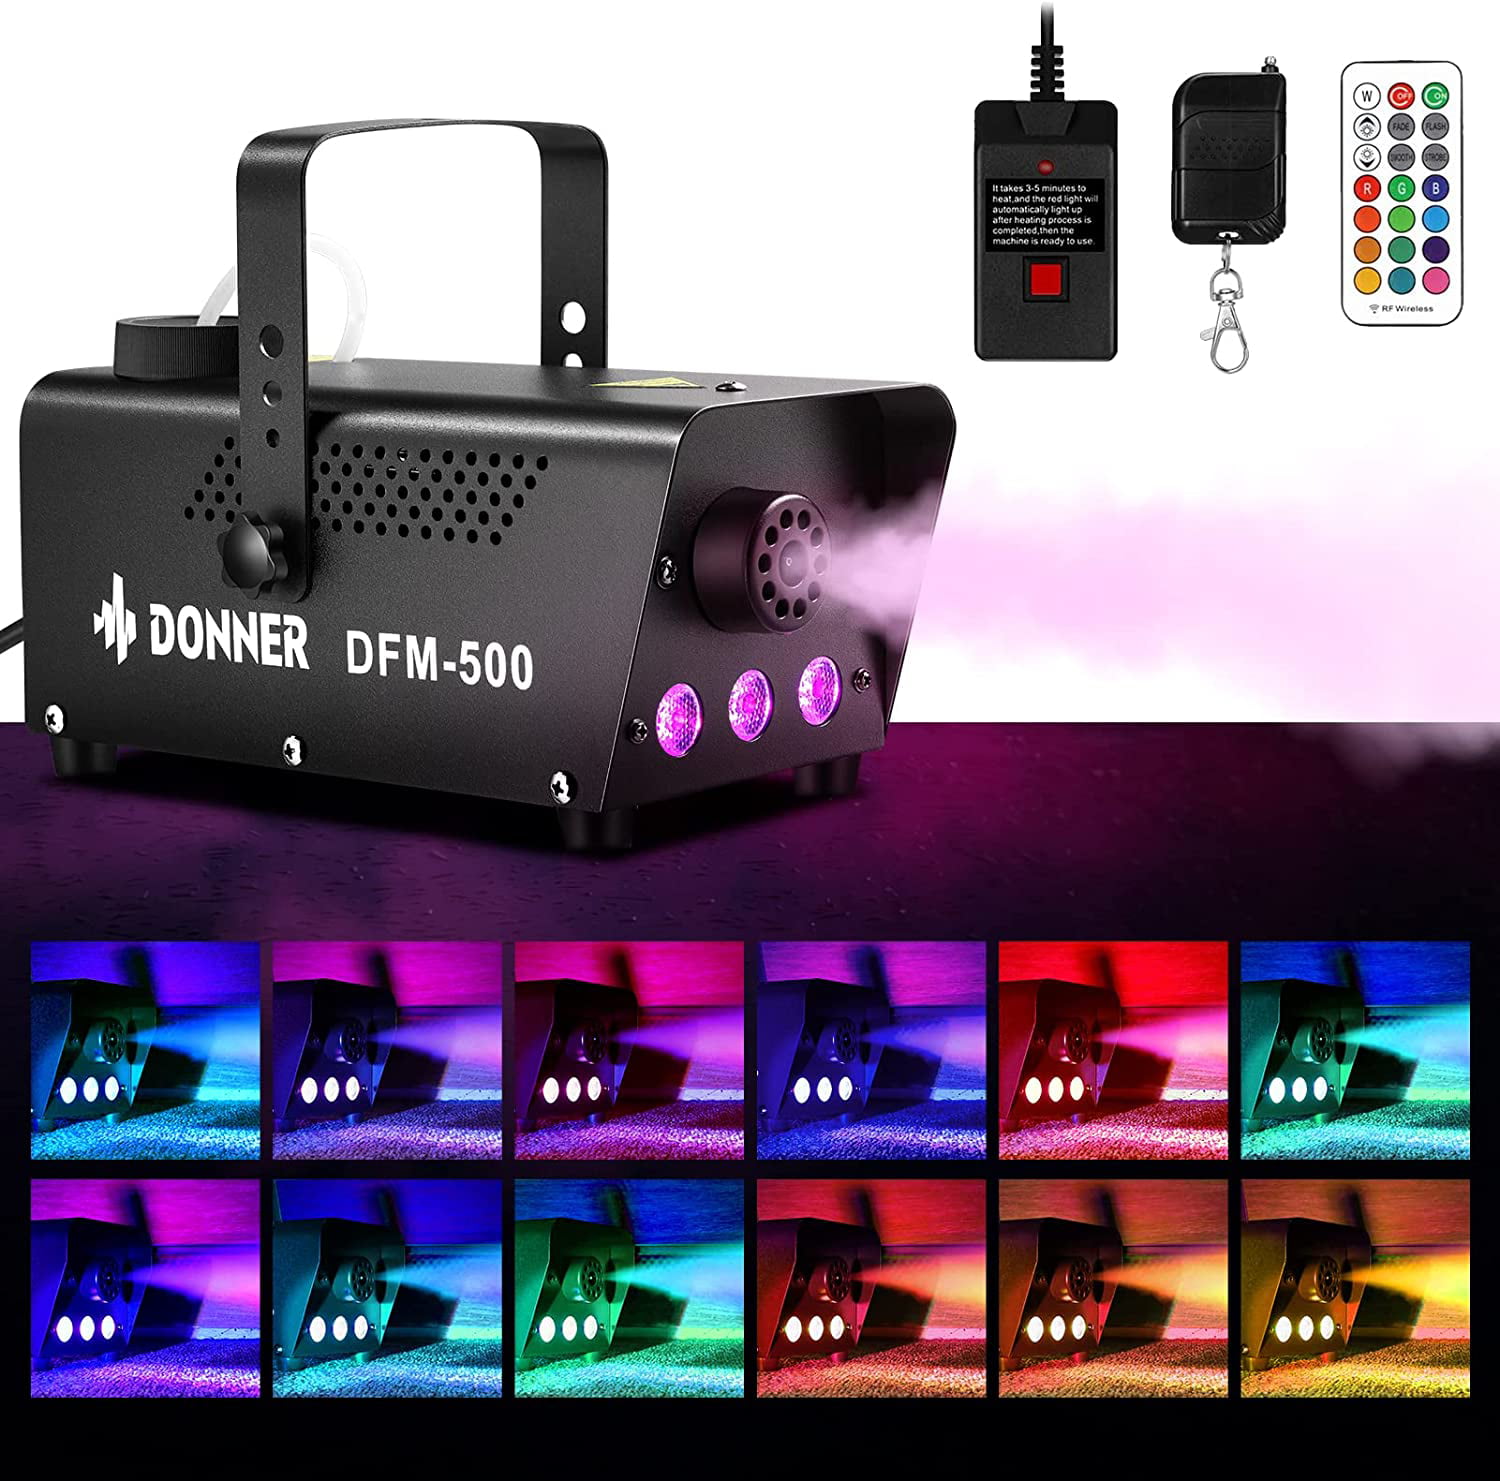 with Wireless and Wired Remote Control for Holidays Parties Weddings Christmas Halloween with Fuse Protection DJ LED Smoke Machine Red,Green,Blue JDR Fog Machine with Controllable lights 